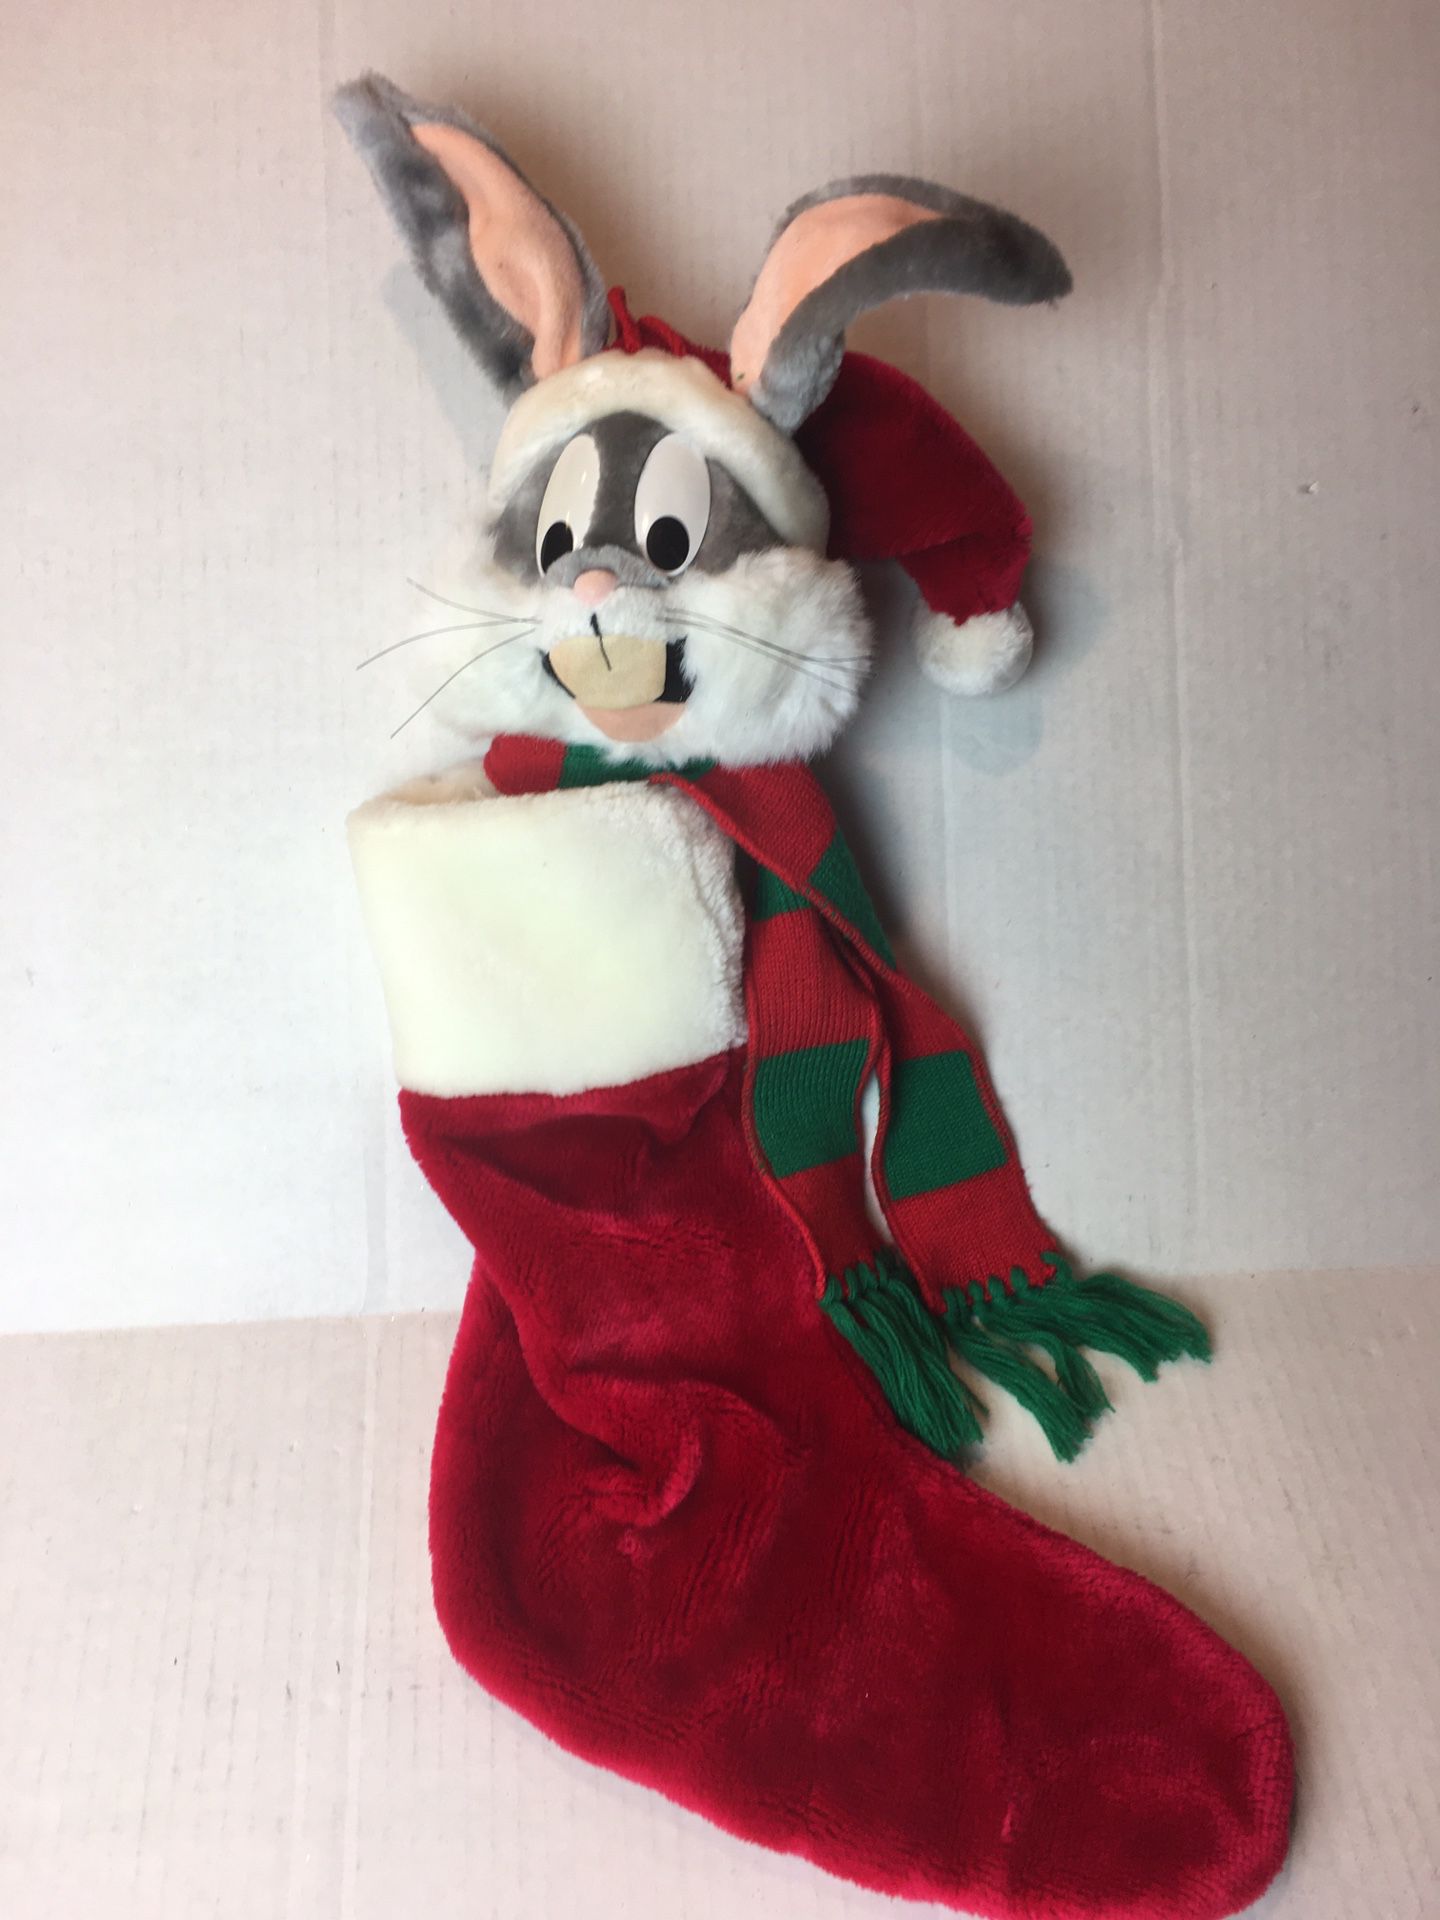 Looney Tunes Bugs Bunny 3D Plush Stuffed Animal Christmas Stocking Rare Vintage from the 1990s